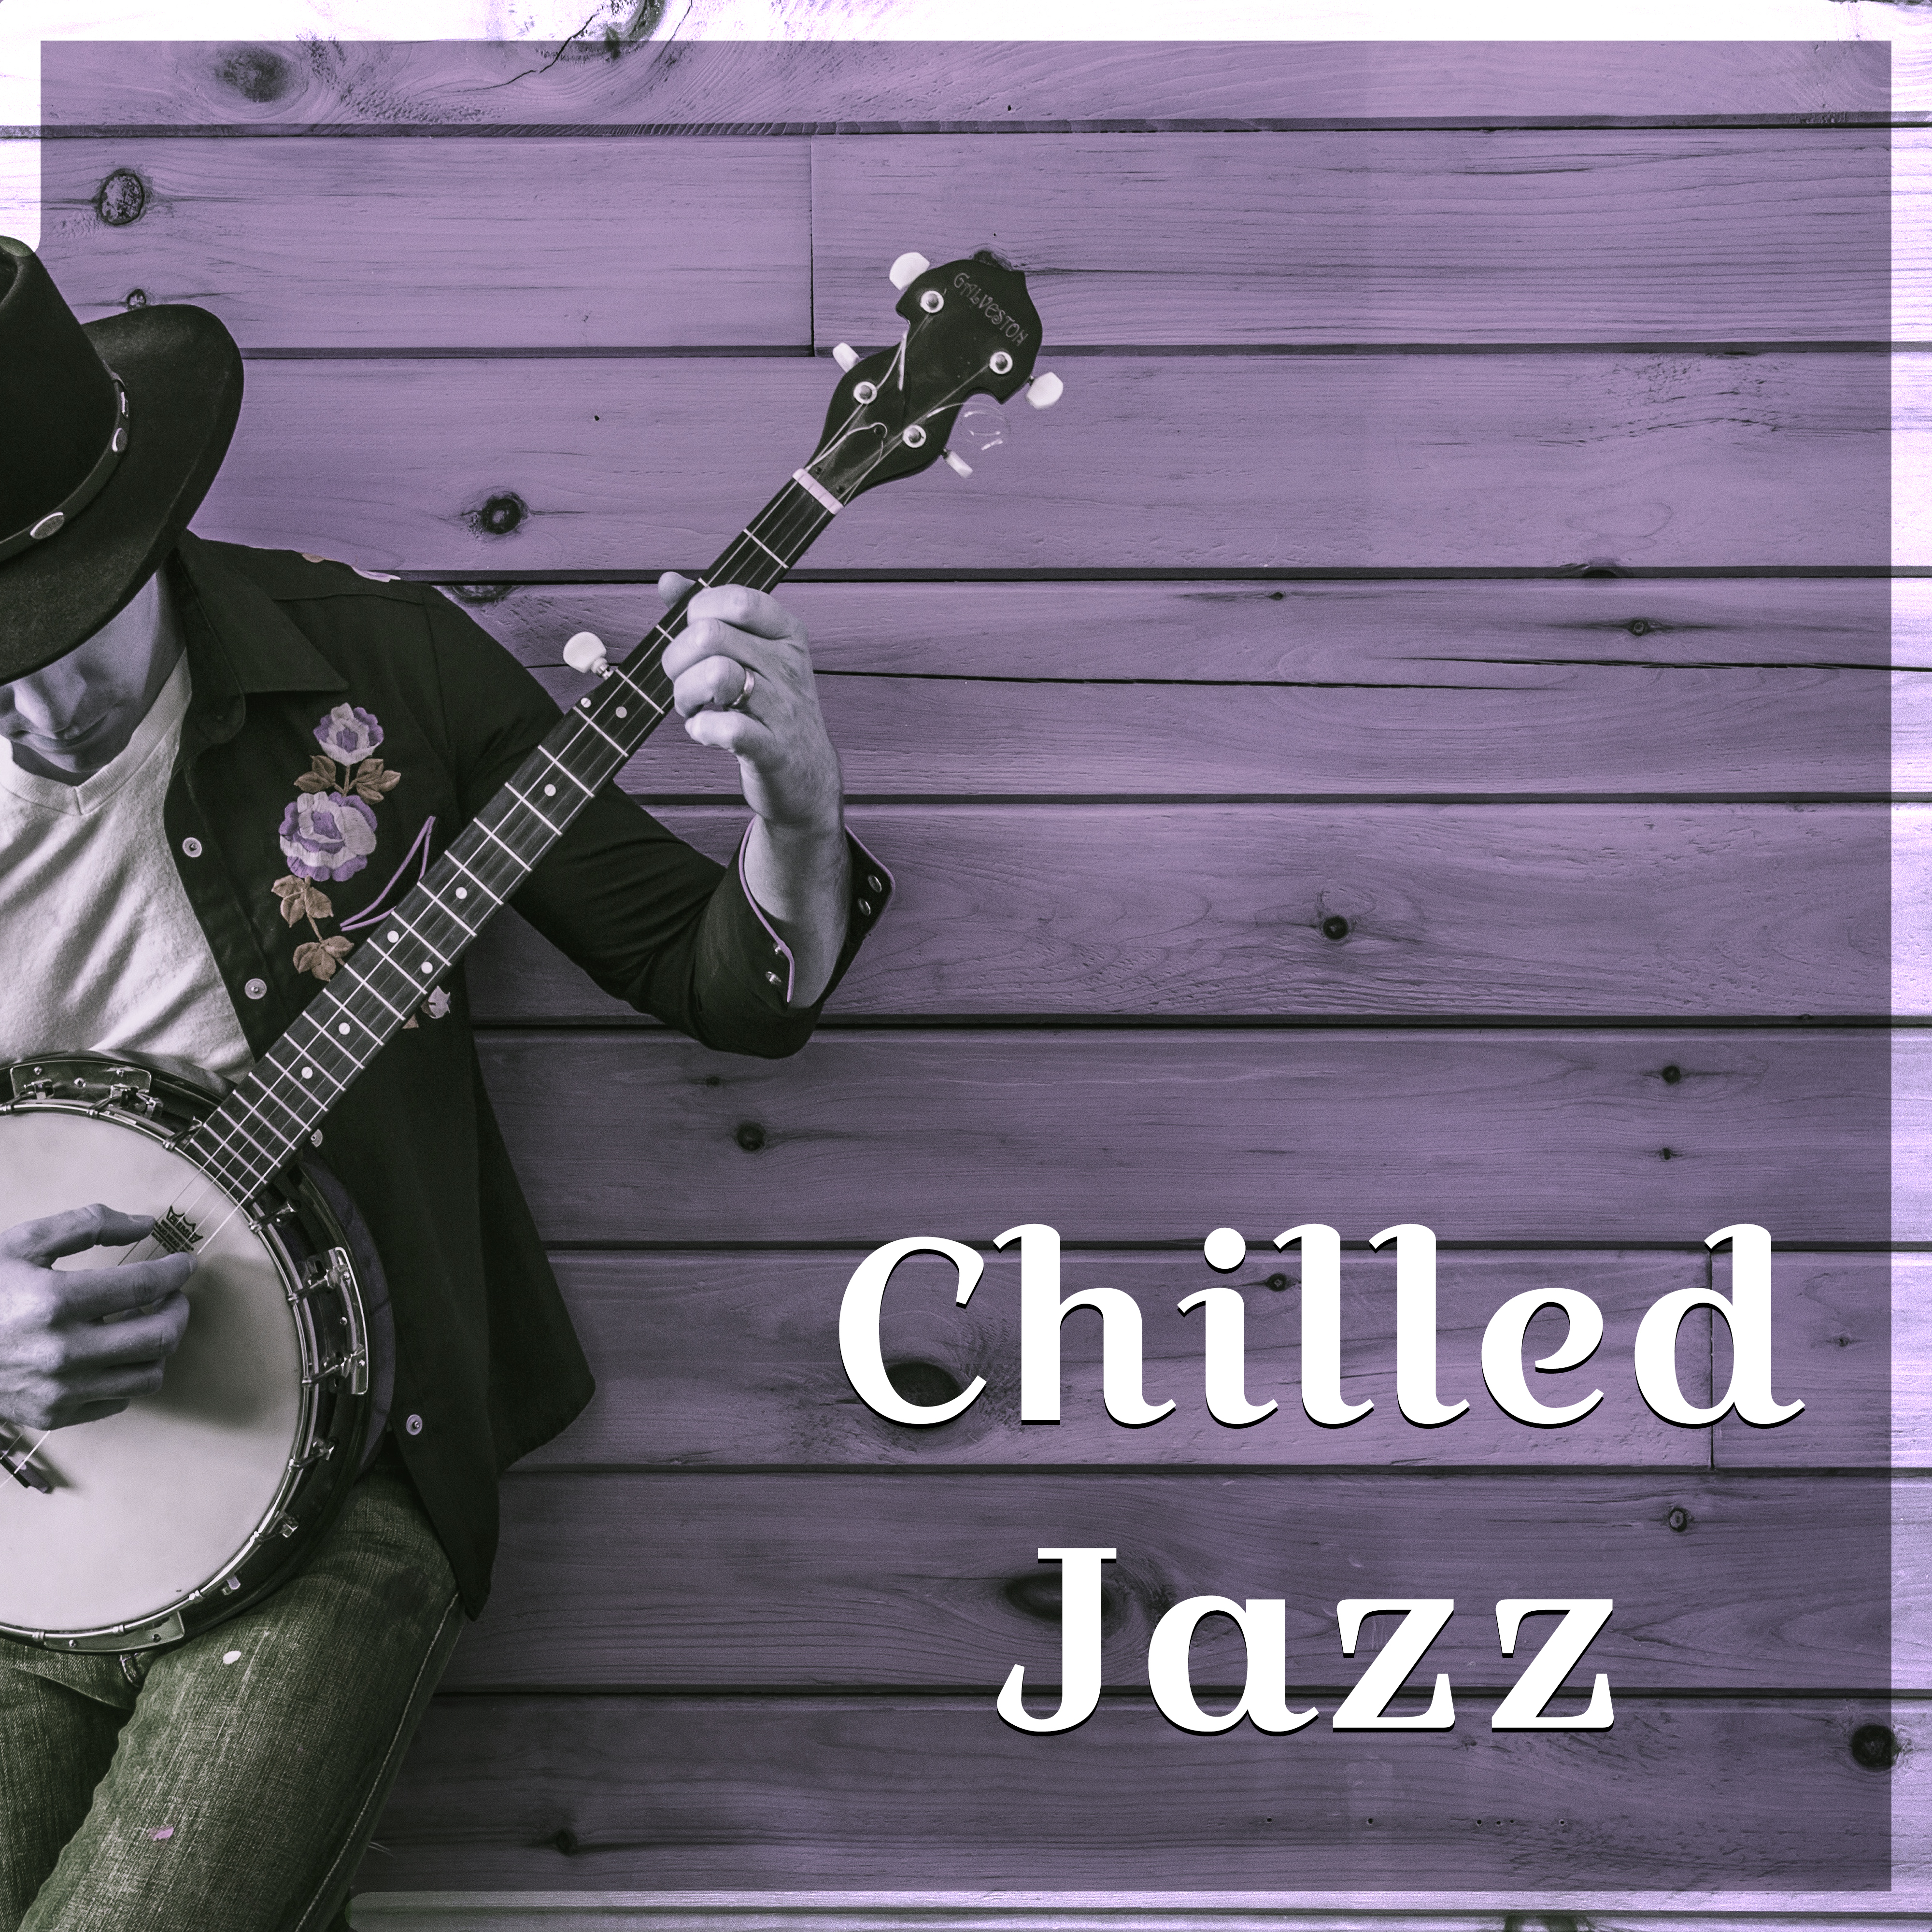 Chilled Jazz – Piano Bar, Restaurant Music, Jazz Cafe, Cocktail Party, Relaxation, Smooth Jazz to Rest, Dinner with Family